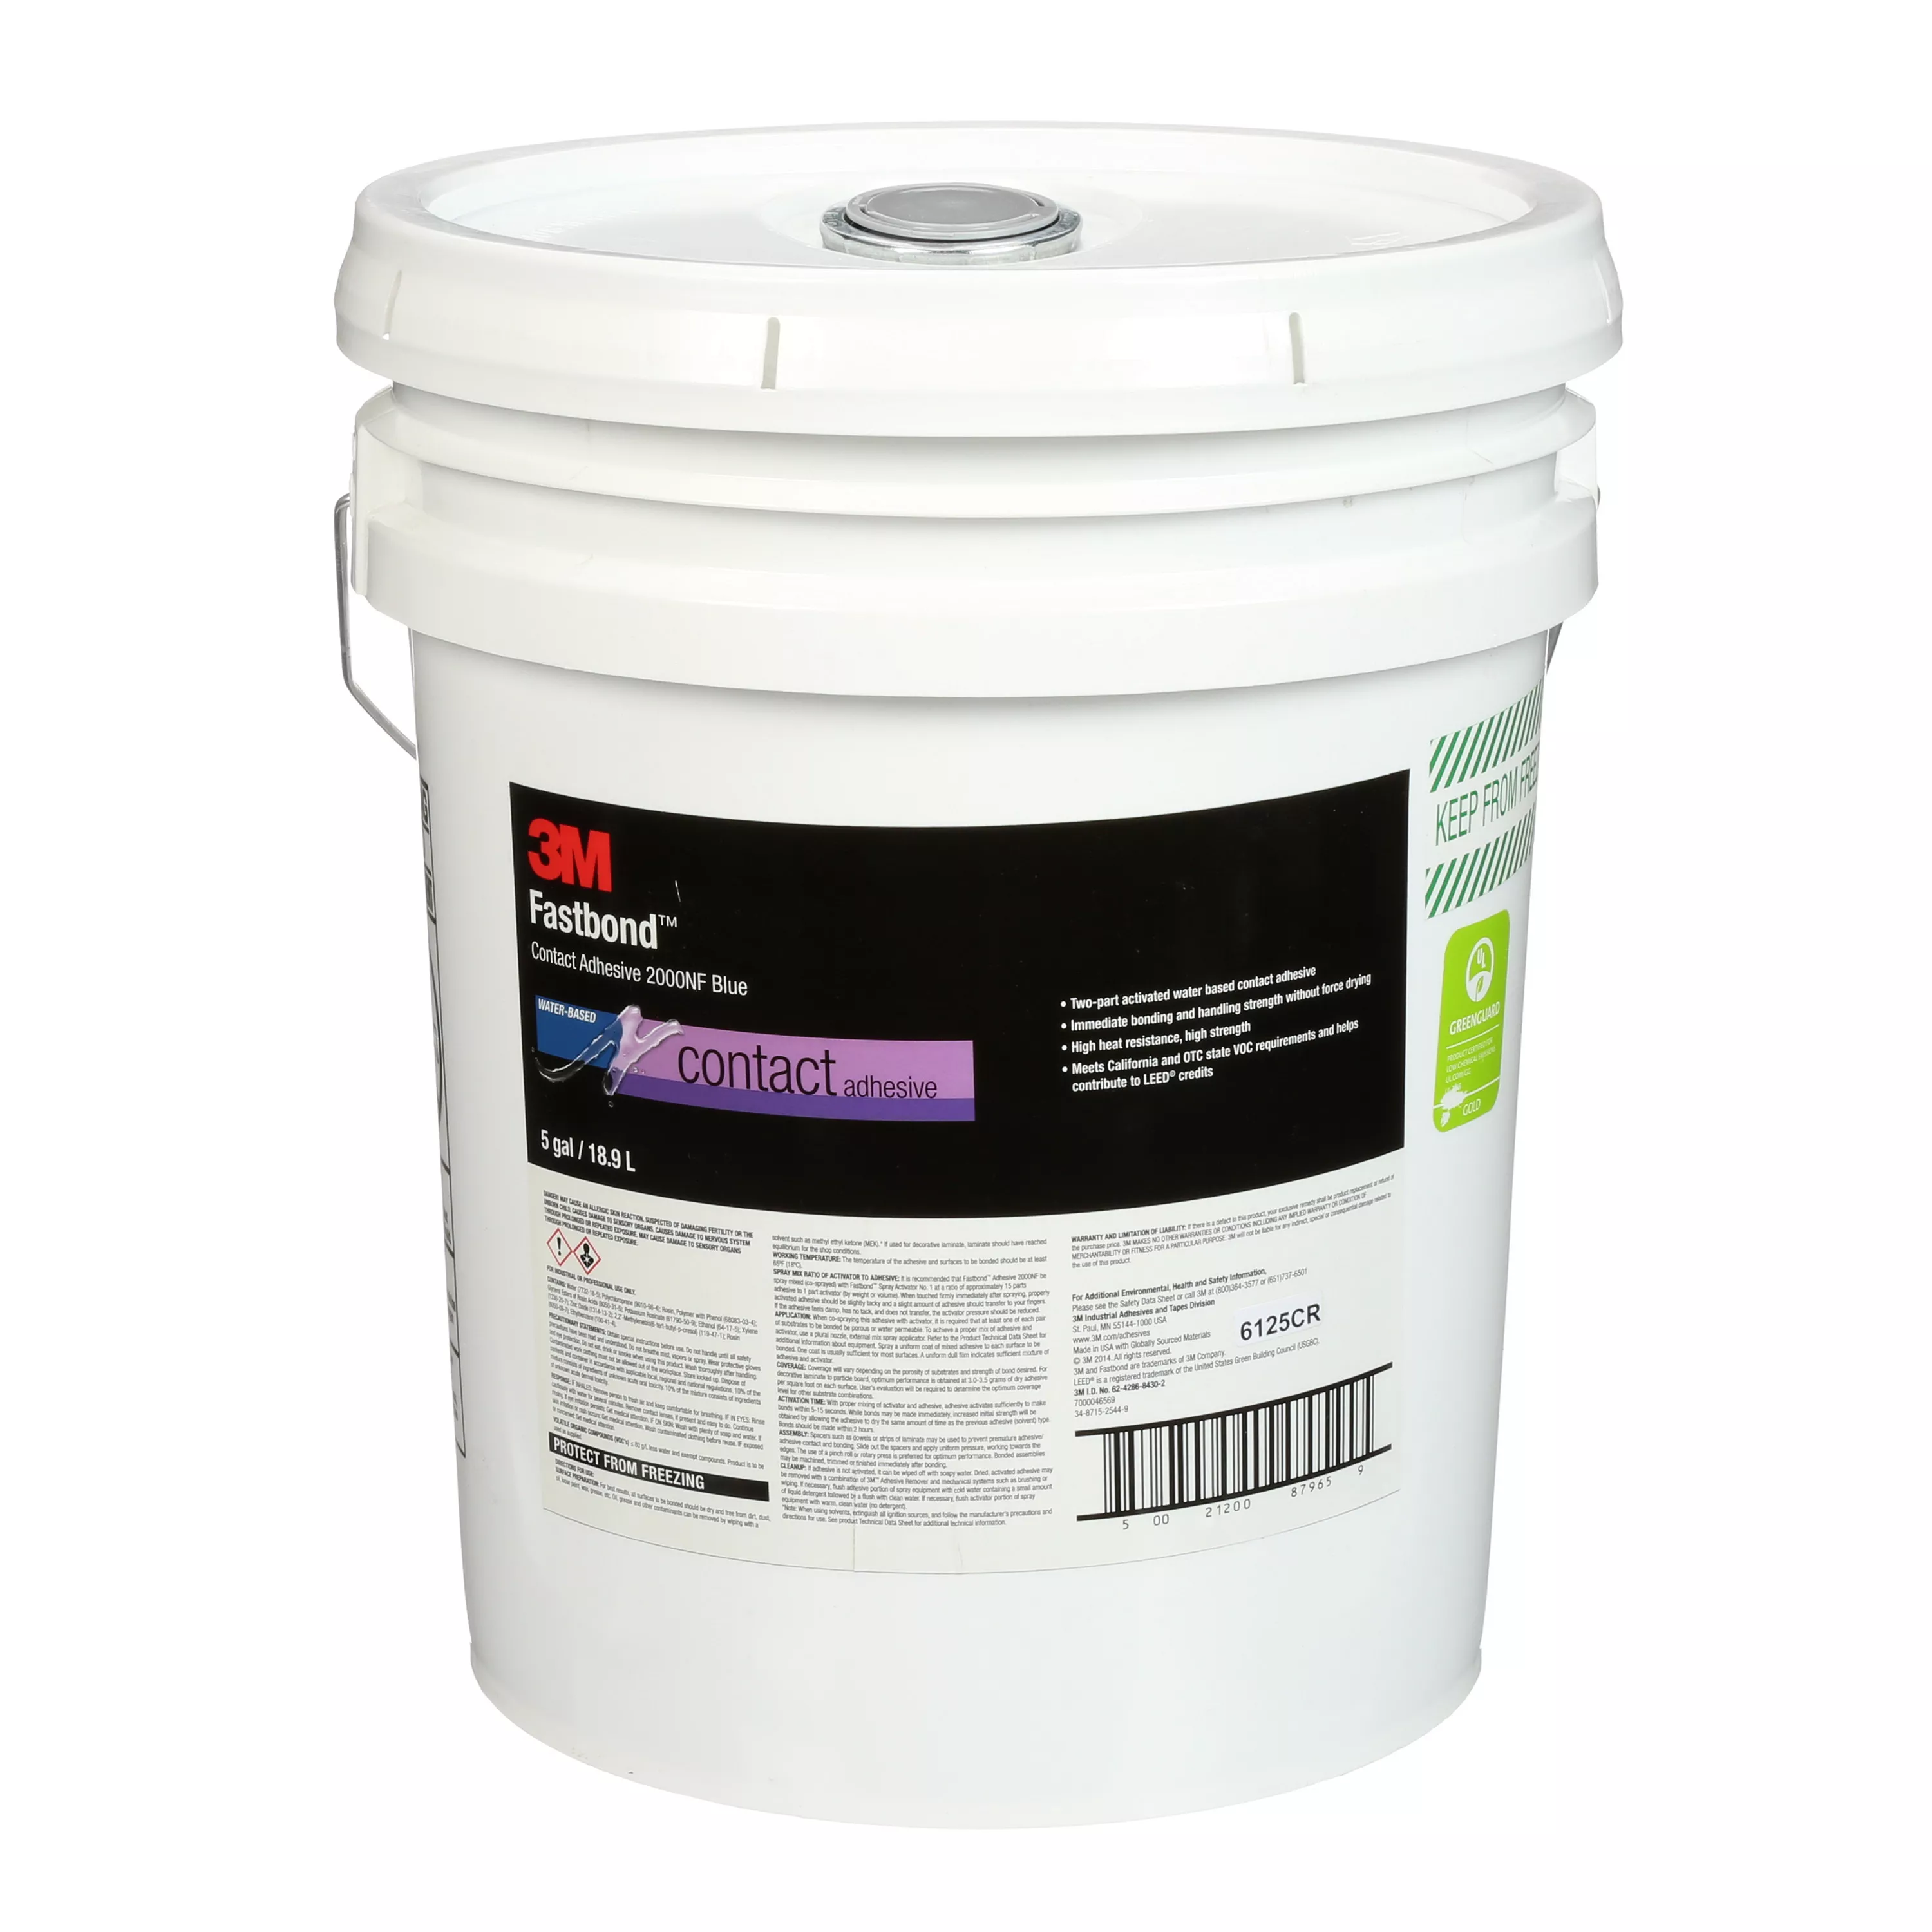 SKU 7000046569 | 3M™ Fastbond™ Contact Adhesive 2000NF